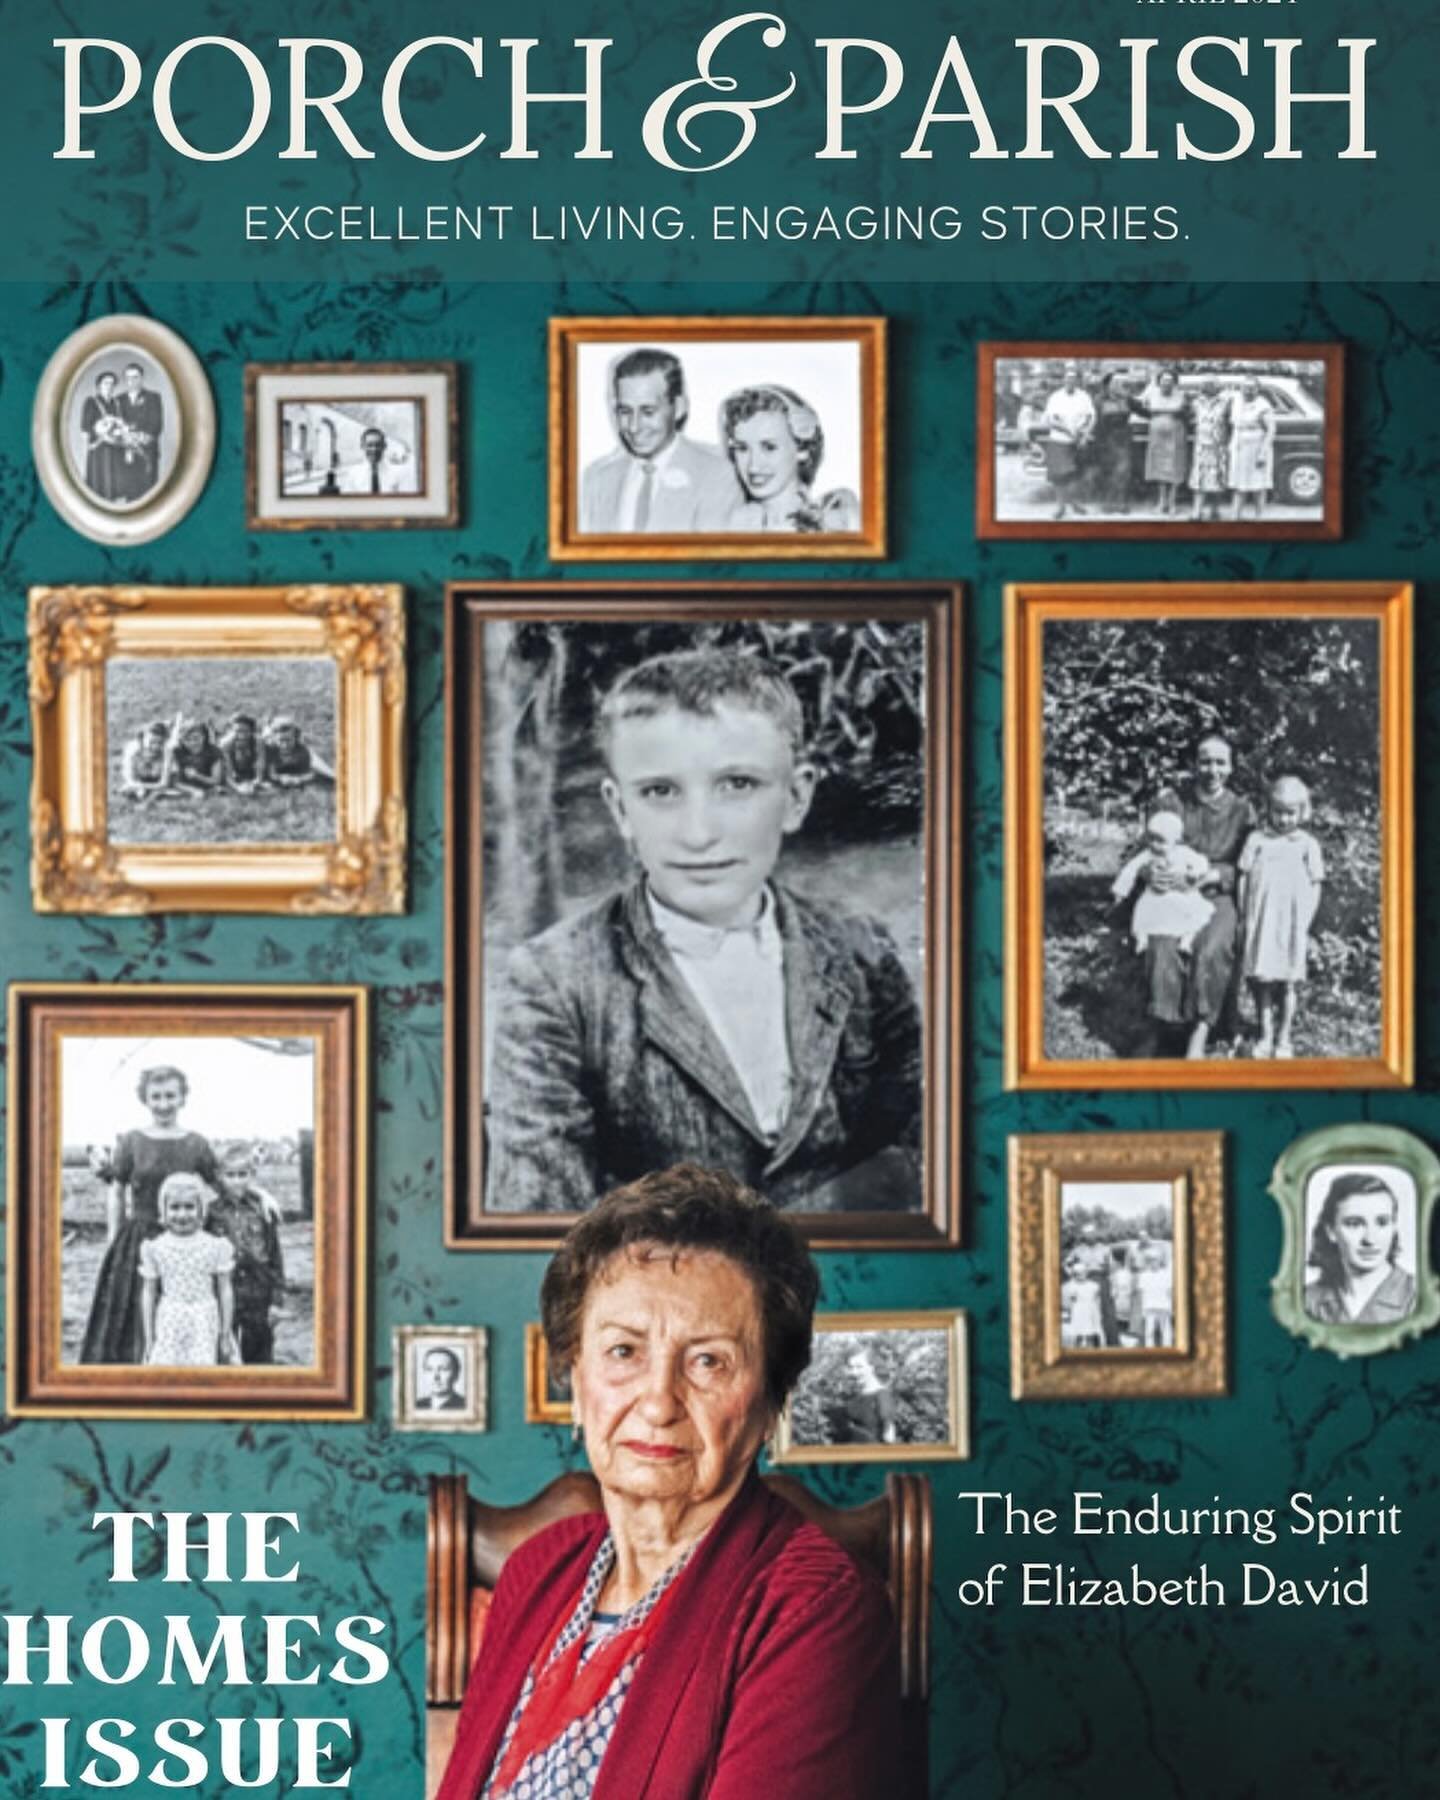 So honored to help share Mrs. Elizabeth David&rsquo;s story through imagery with @porchandparish 

&hellip;The photos on the wall are of her early life in Yugoslavia, then Austria, before her emigration to the US. The center portrait is of her older 